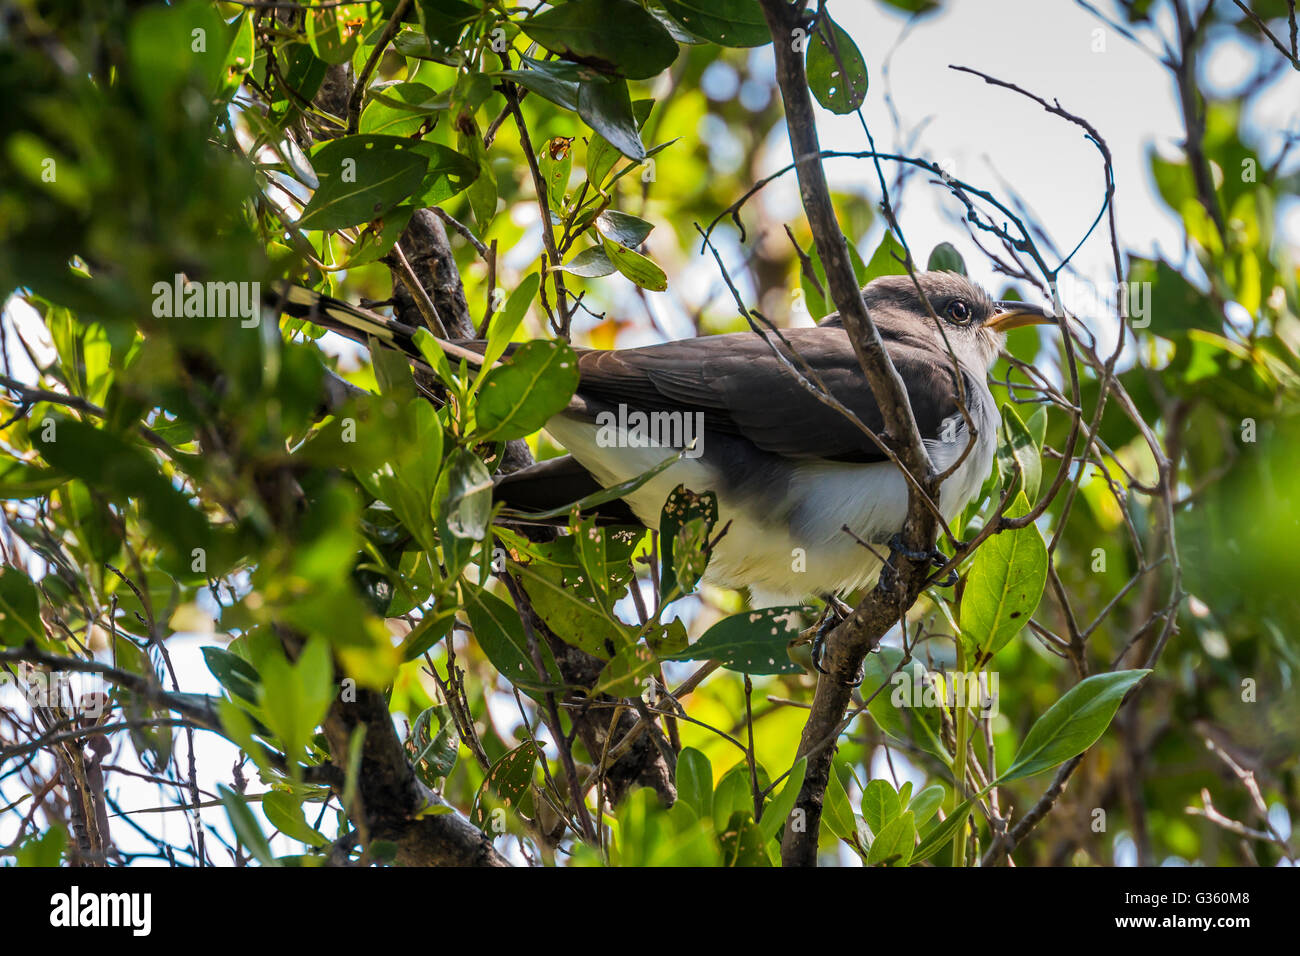 Yellow-billed Cuckoo, Coccyzus americanus, making migration stop at Fort Jefferson, Dry Tortugas National Park, Florida, USA Stock Photo